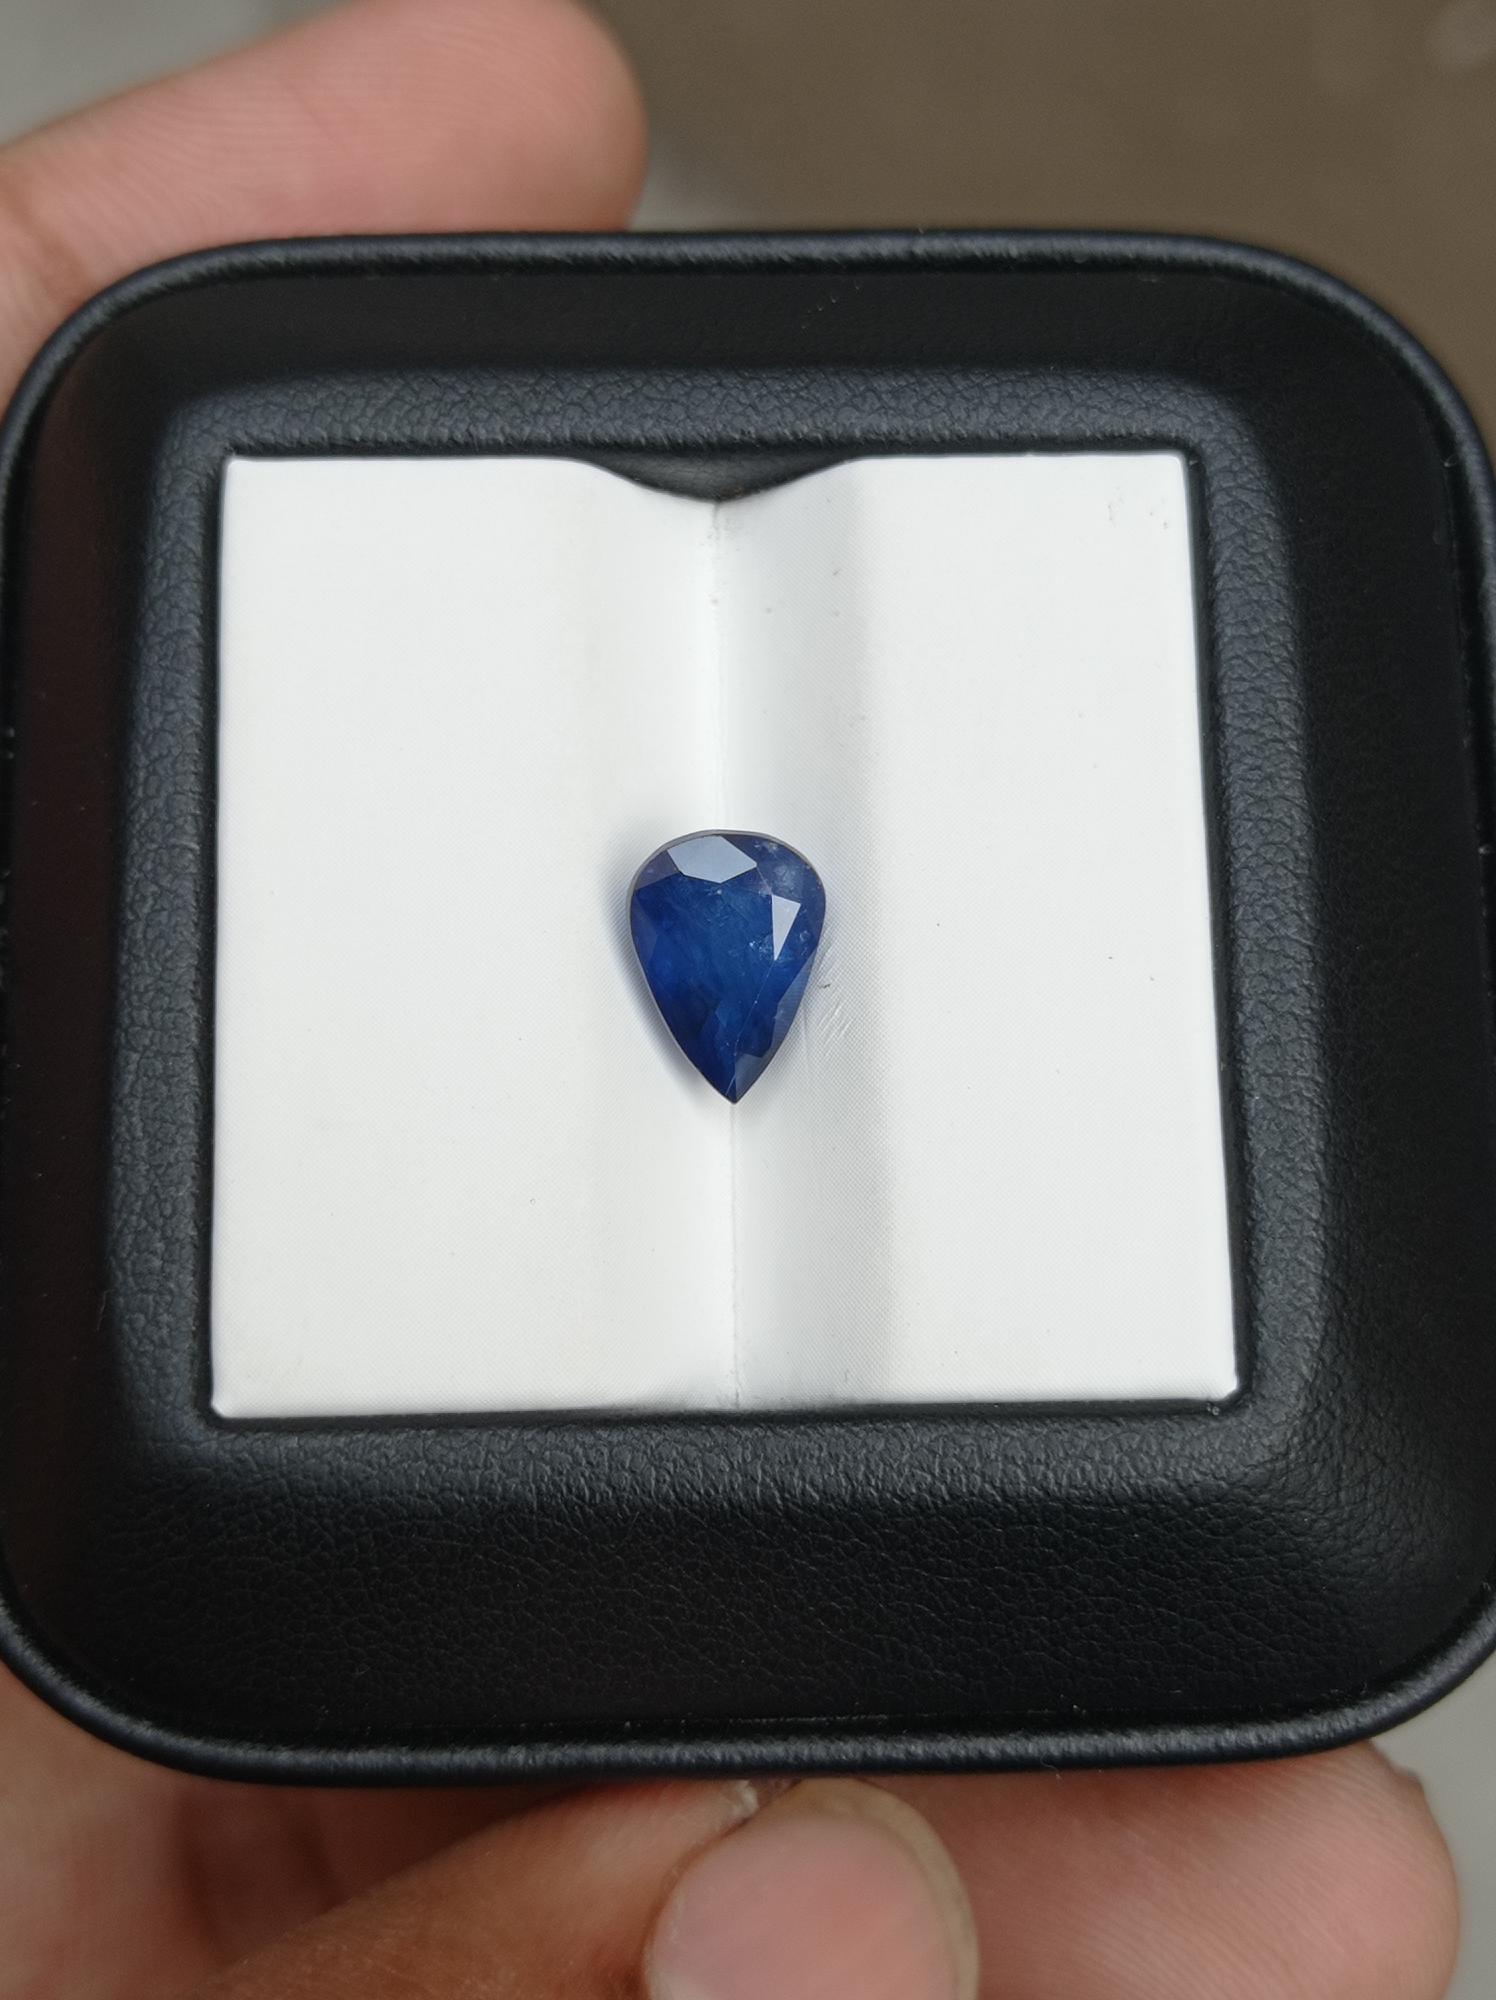 2.95ct Certified Ceylon Sapphire for Sale - Natural Blue Sapphire - September Birthstone